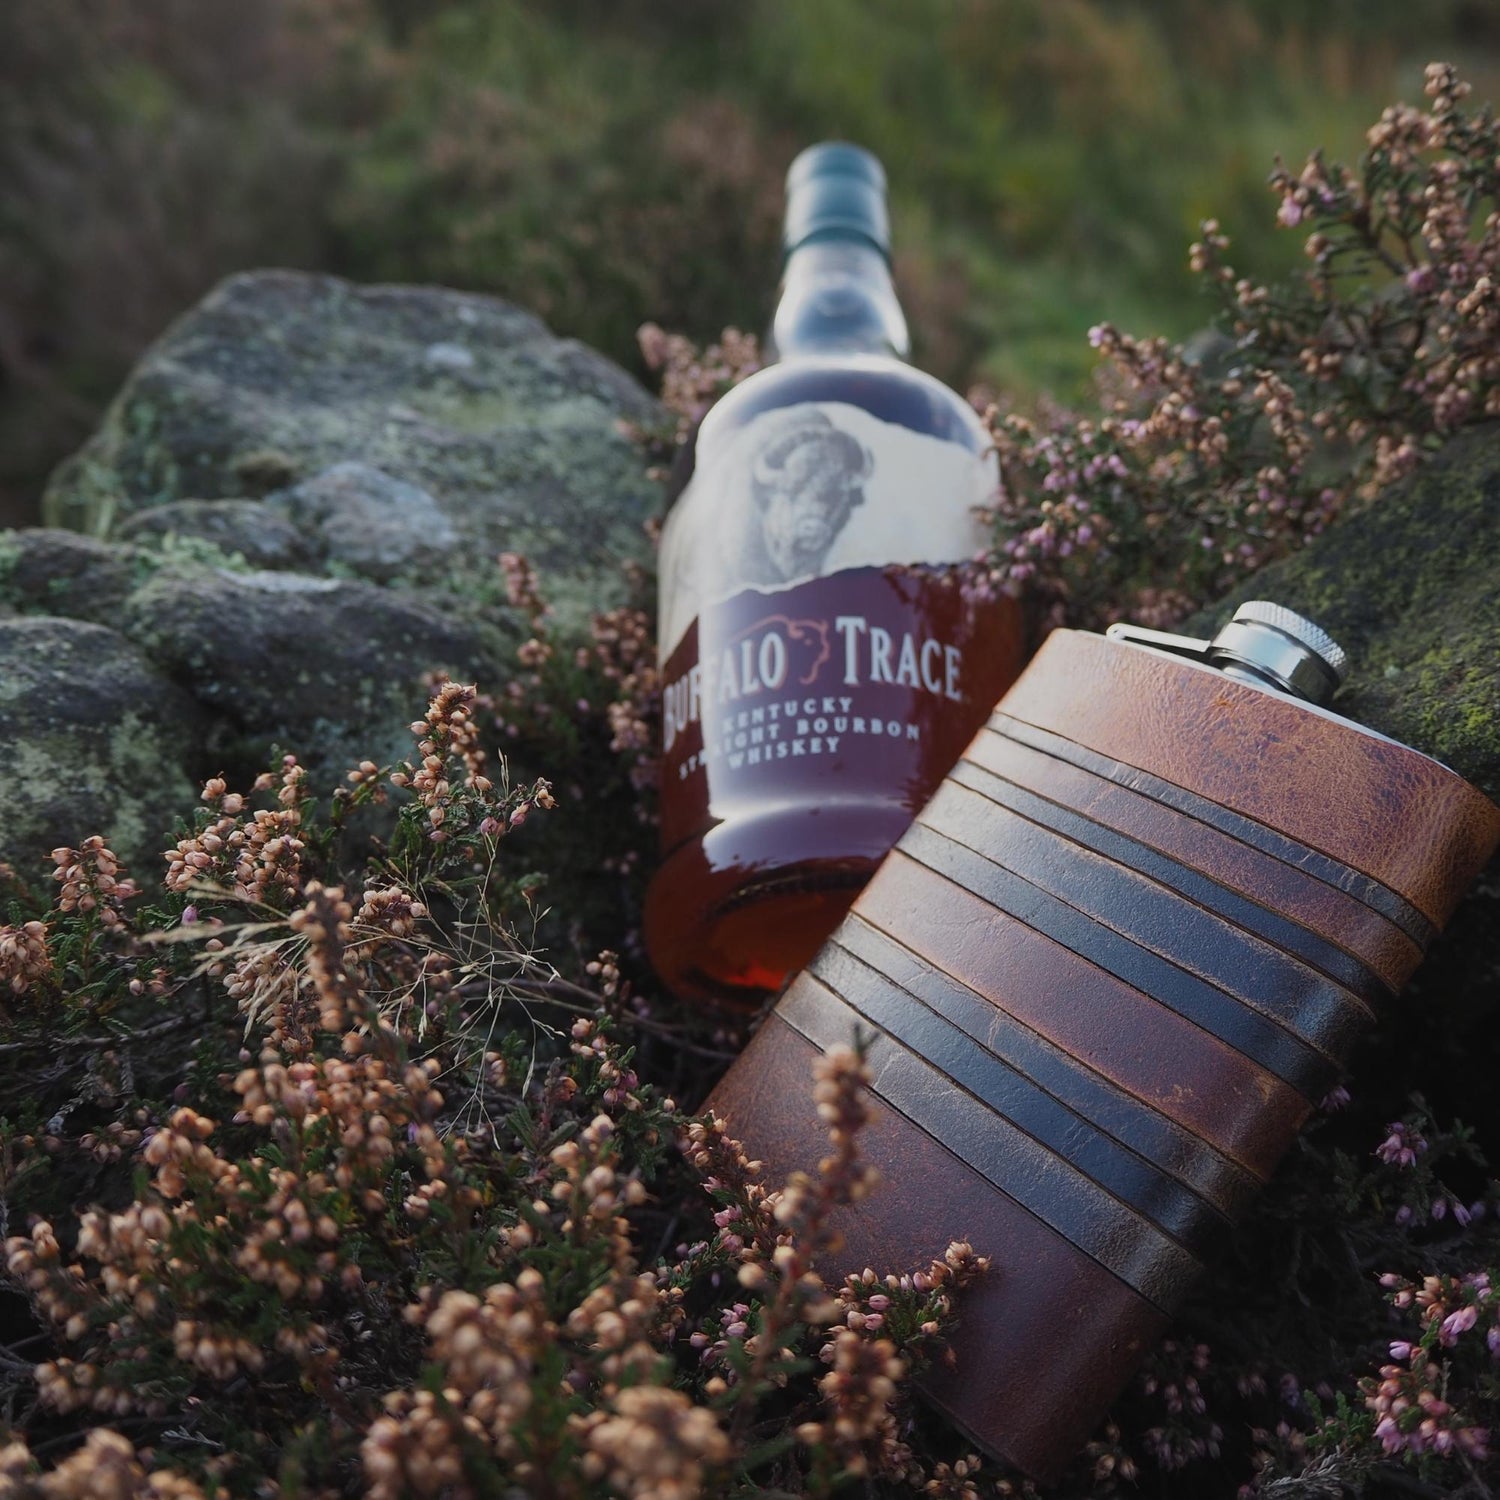 Our rust layers hip flask next to a bottle of whiskey, nestled in heather and stone on the moors.